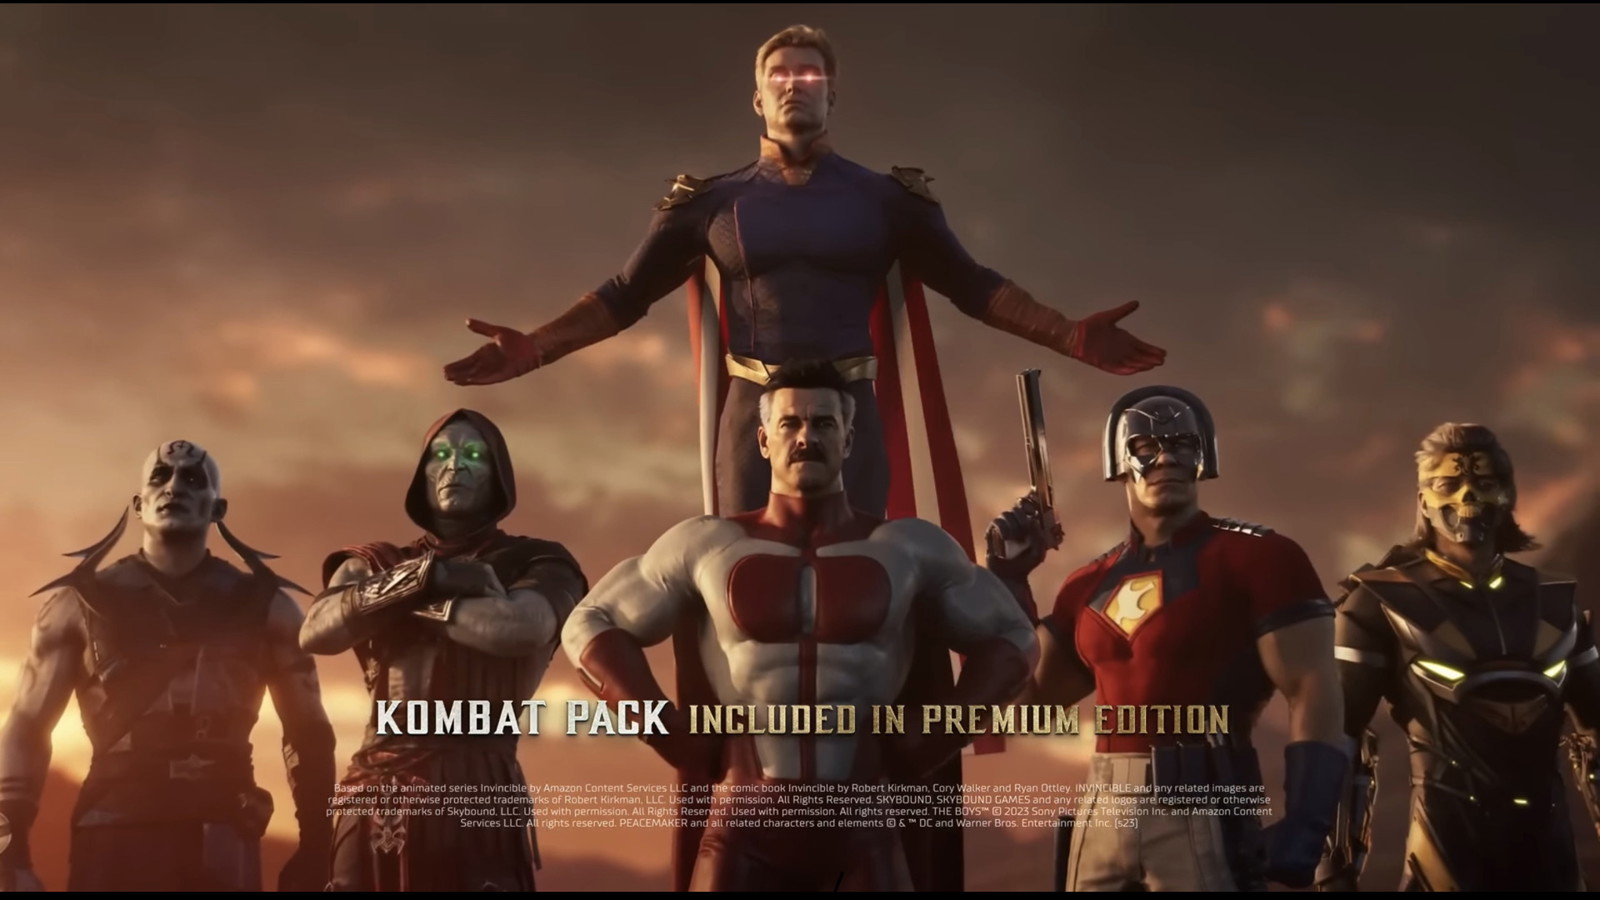 The Kombat Pack to be Included in the Premium Edition